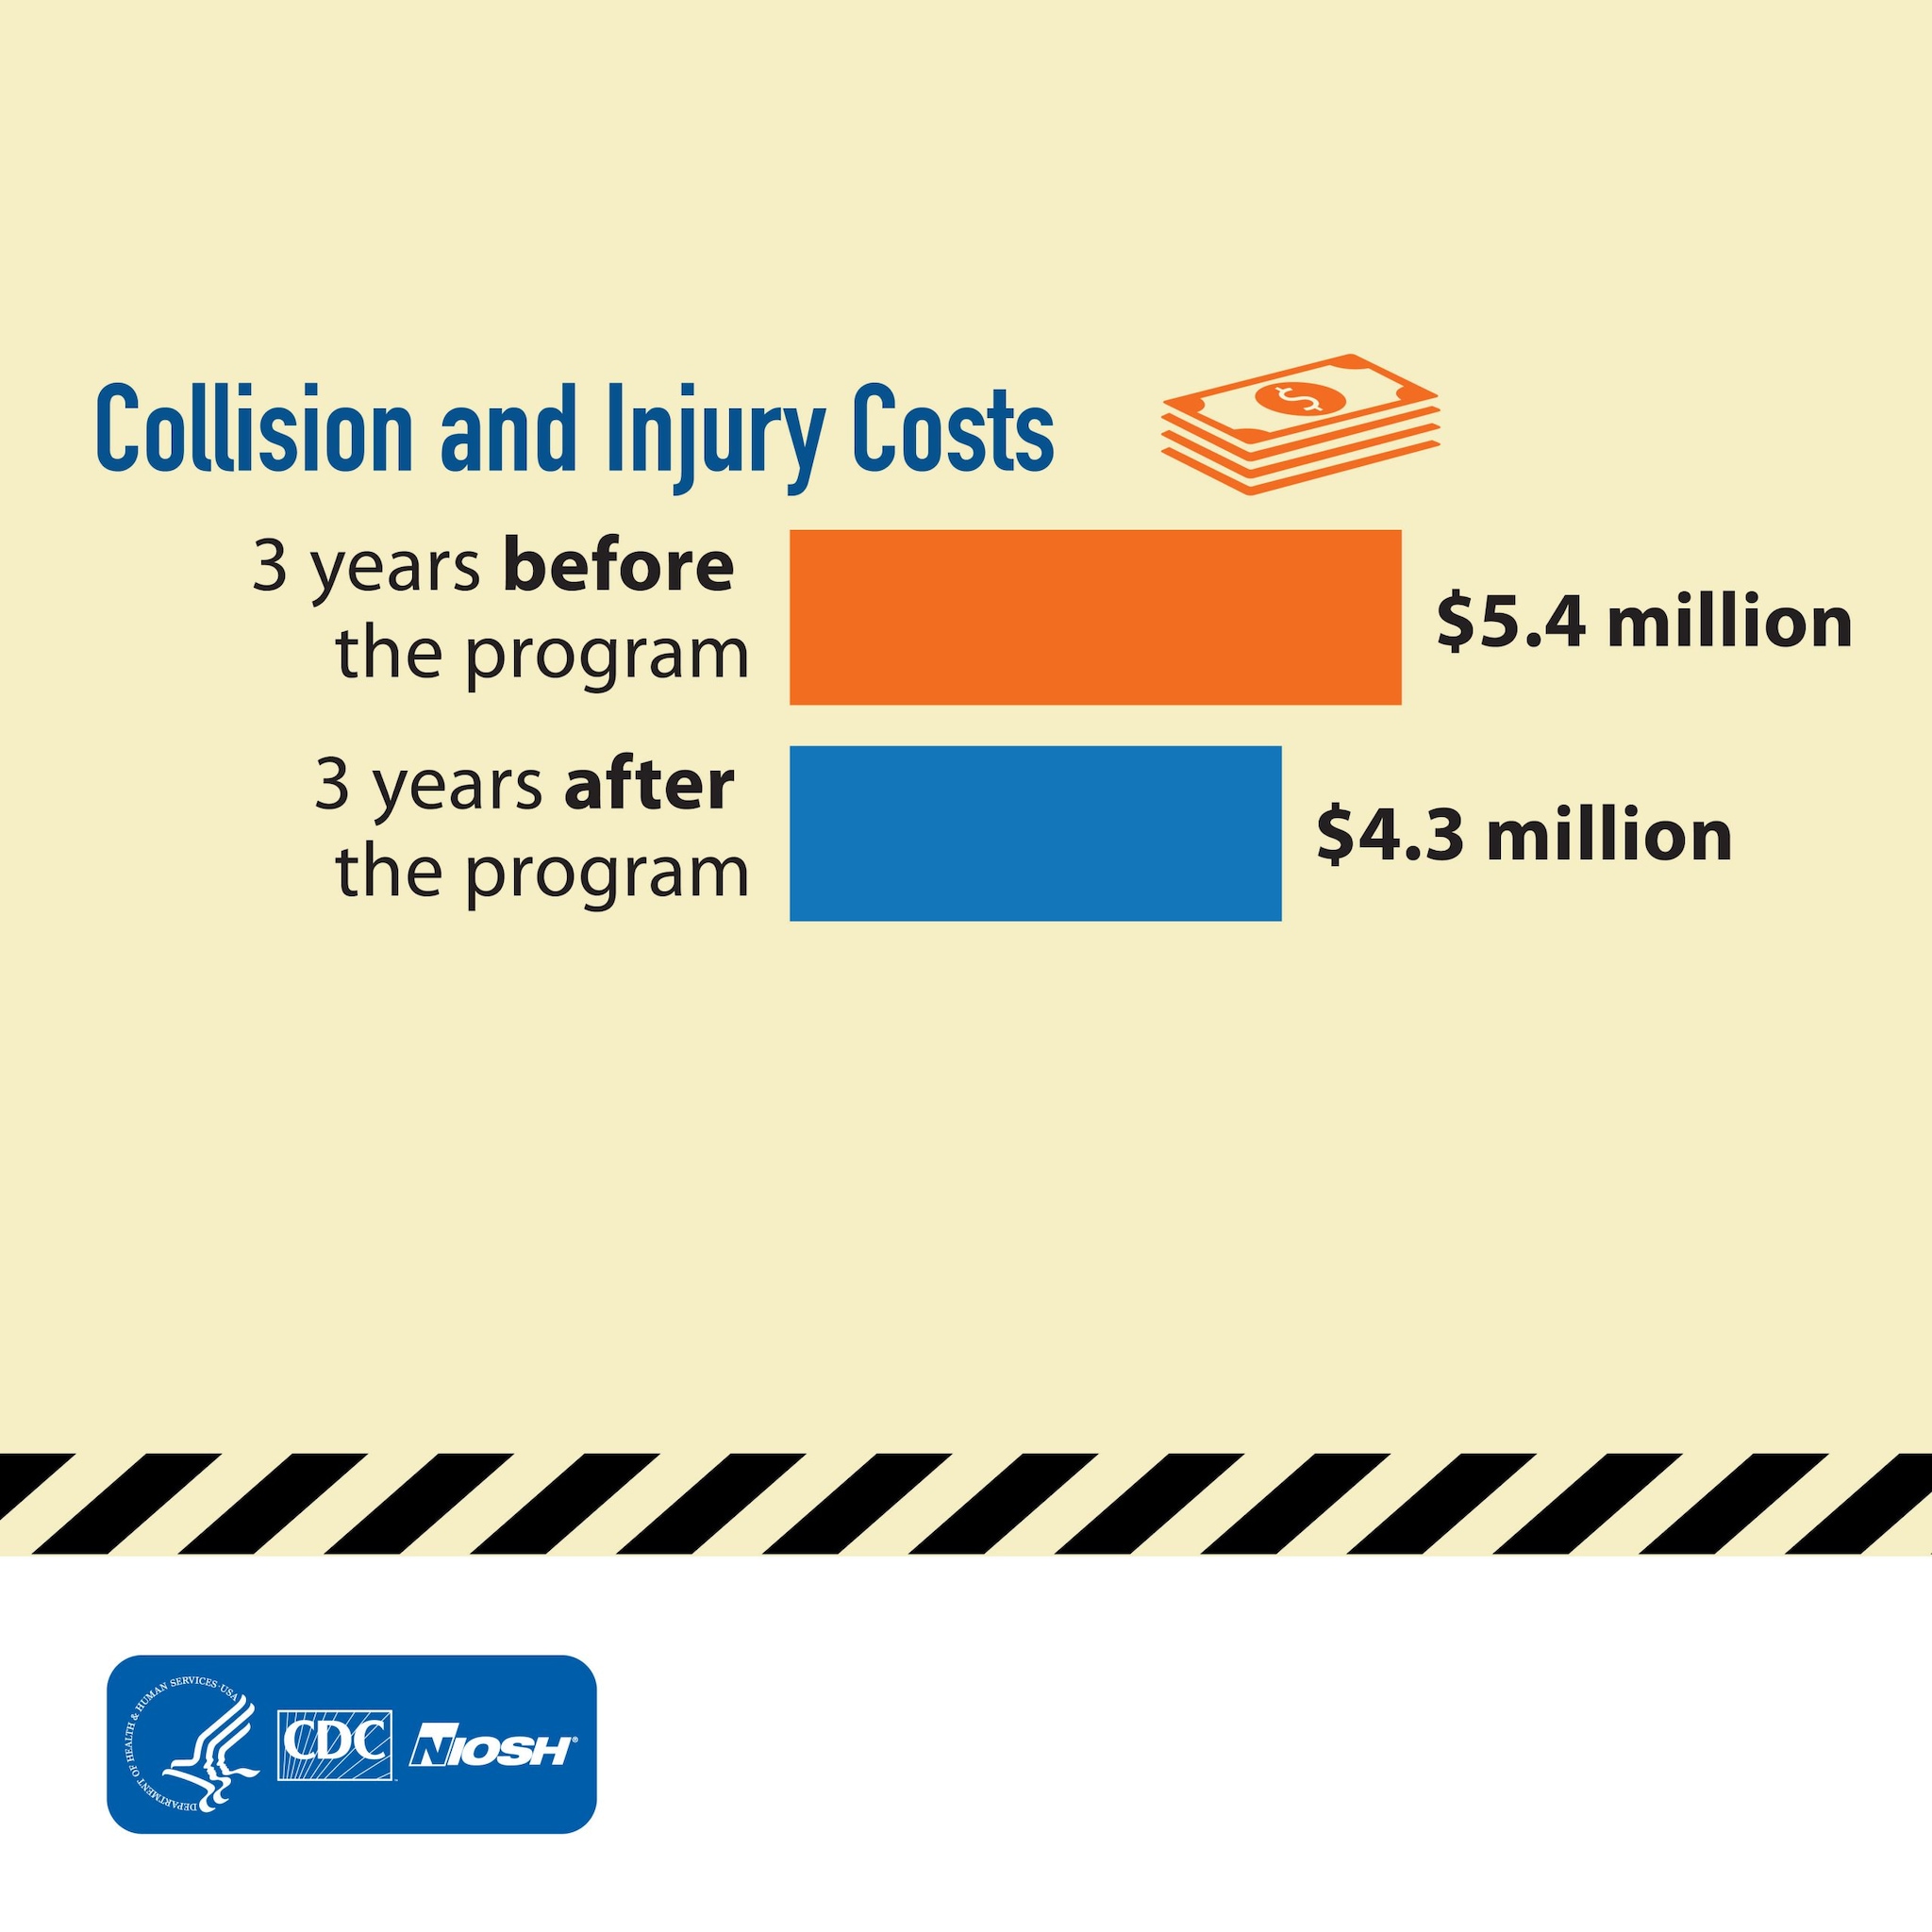 A Safe Driving Program: Collision and Injury Costs: 3 years before=$5.4 million - 3 years after=$4.3 million